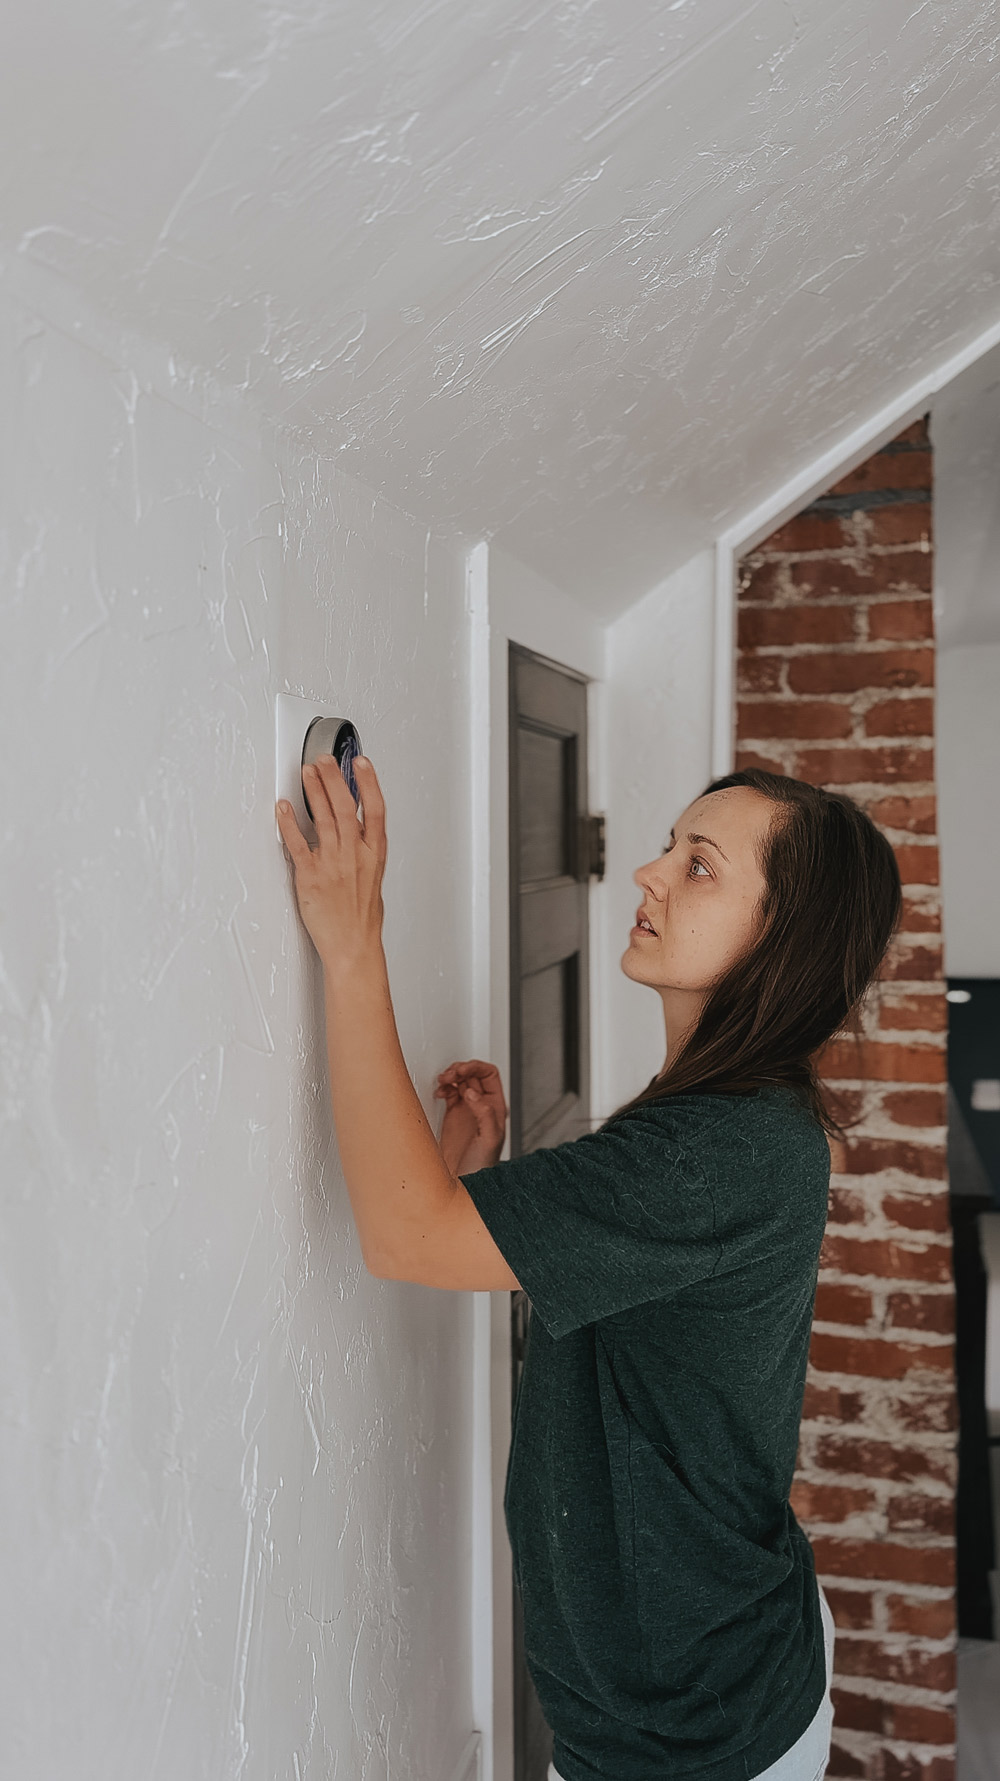 A person adding a thermostat to the wall.